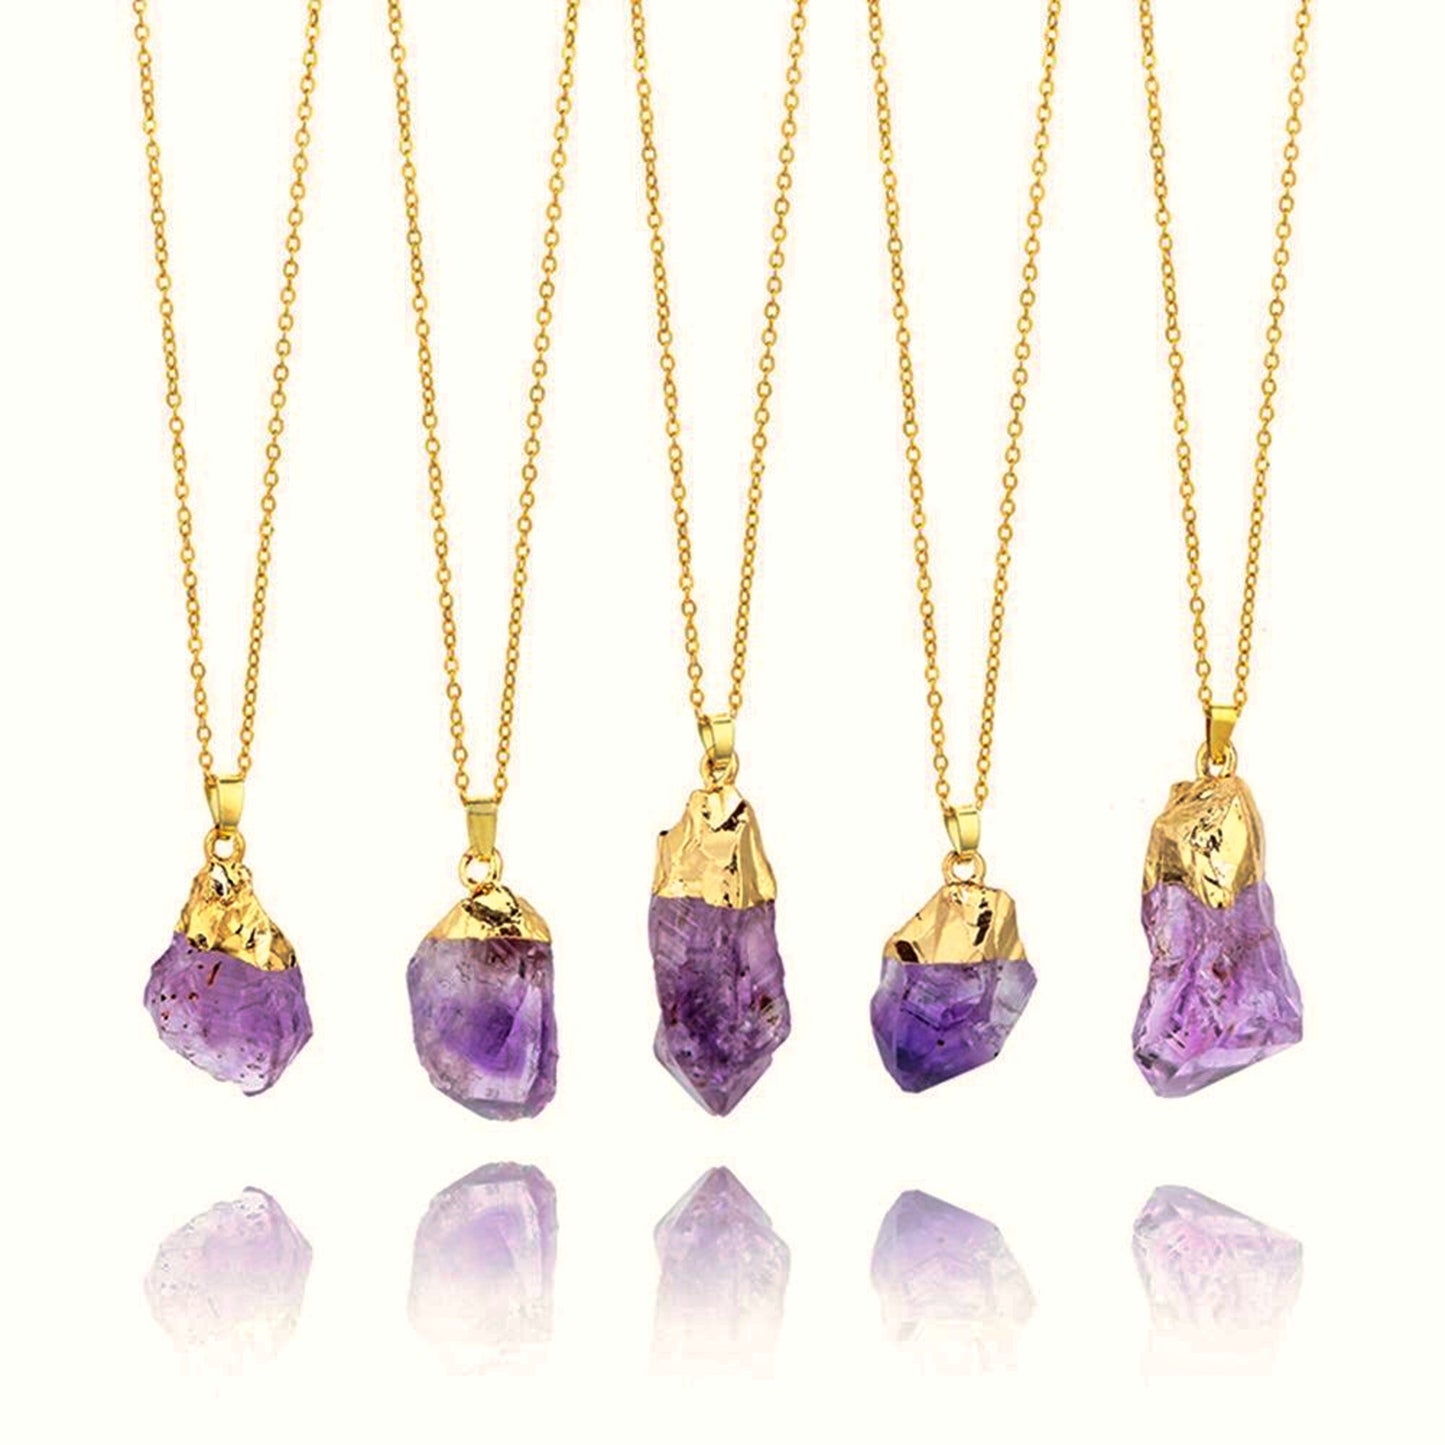 Natural Amethyst Gemstone Pendant with Long Chain - Healing Crystal Point Necklace and Home Decor in Purple